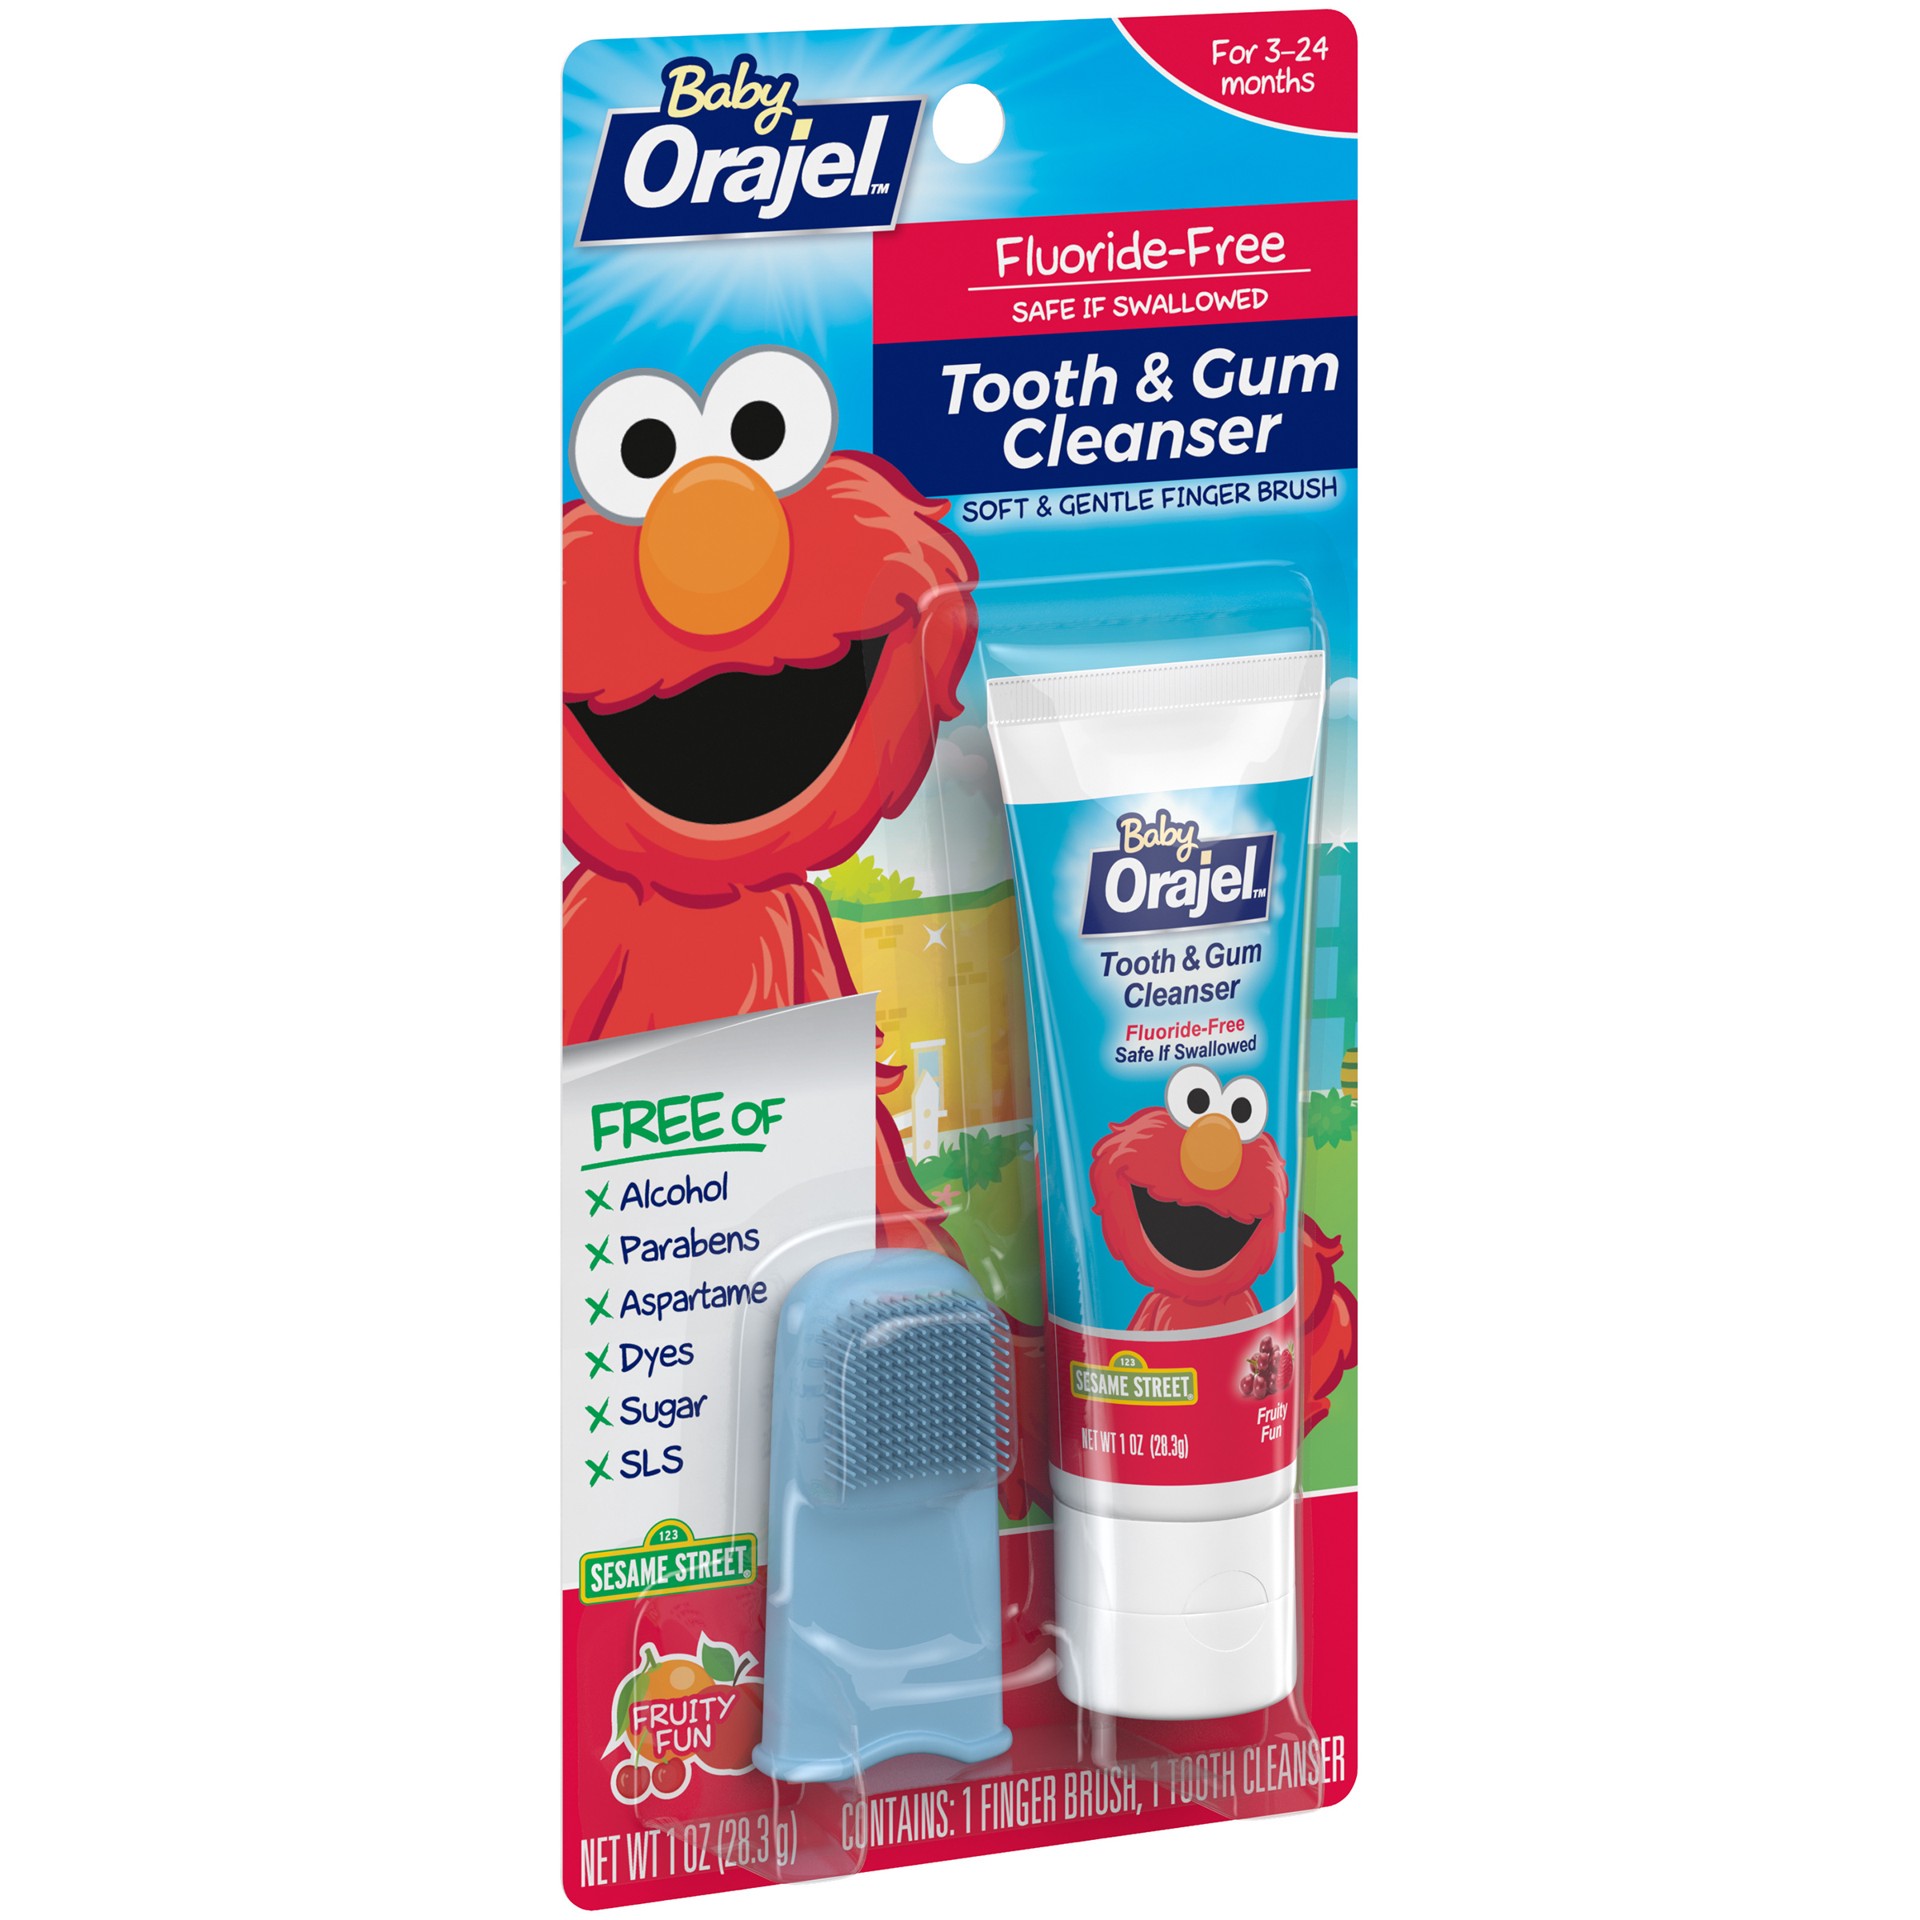 slide 4 of 4, Orajel Elmo Fluoride-Free Tooth & Gum Cleanser with Finger Brush, Combo Pack, Fruity Fun Flavored Non-Fluoride, 1.0 oz., 1 oz